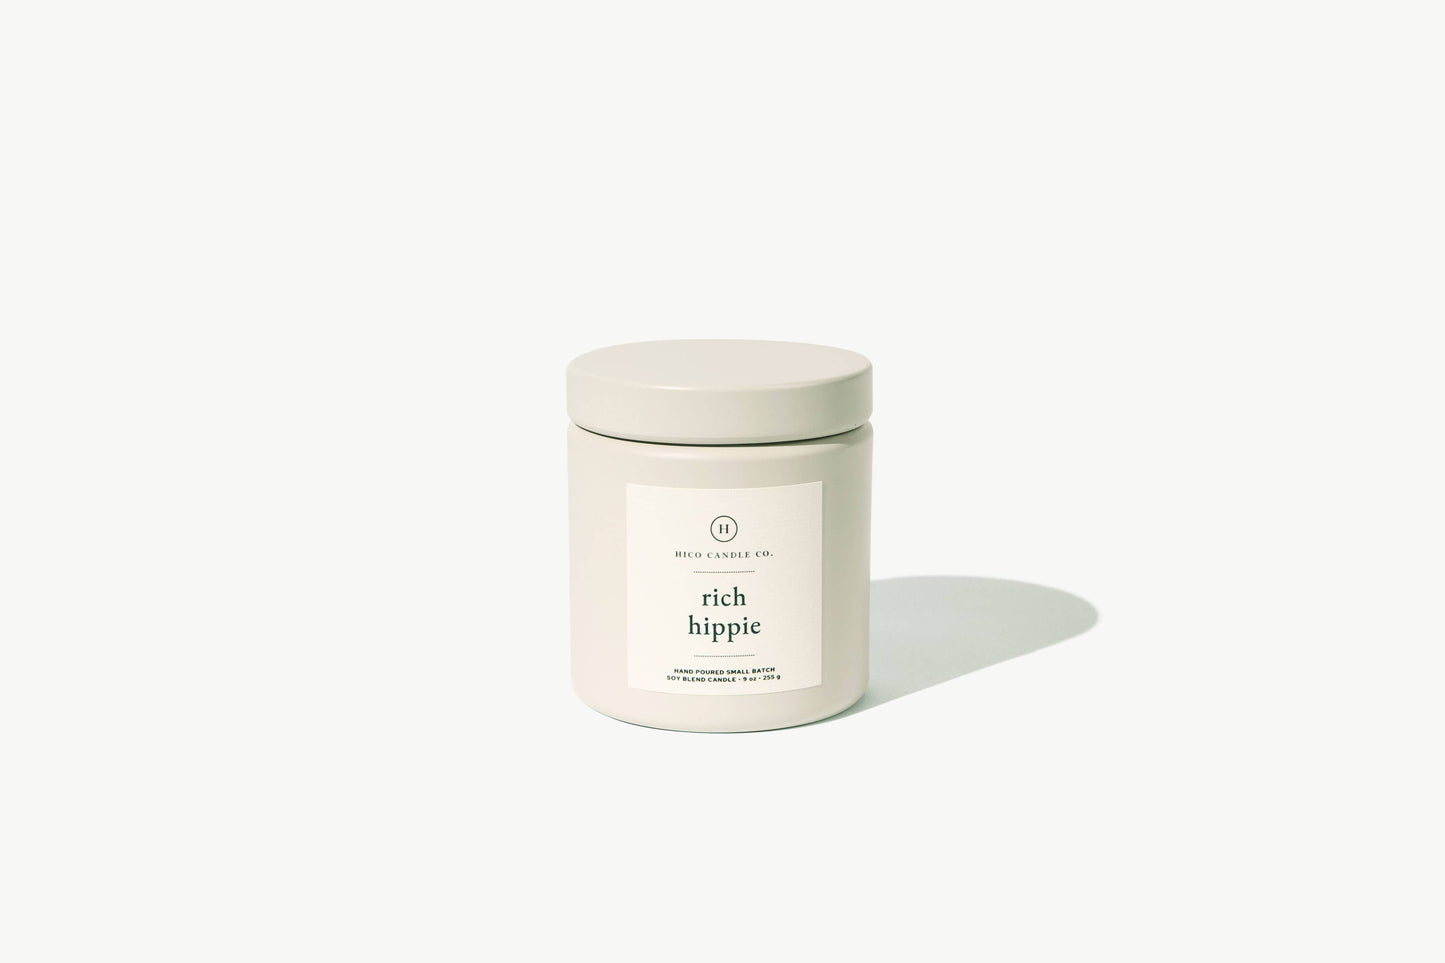 Hico Candle Co. - Rich Hippie Candle